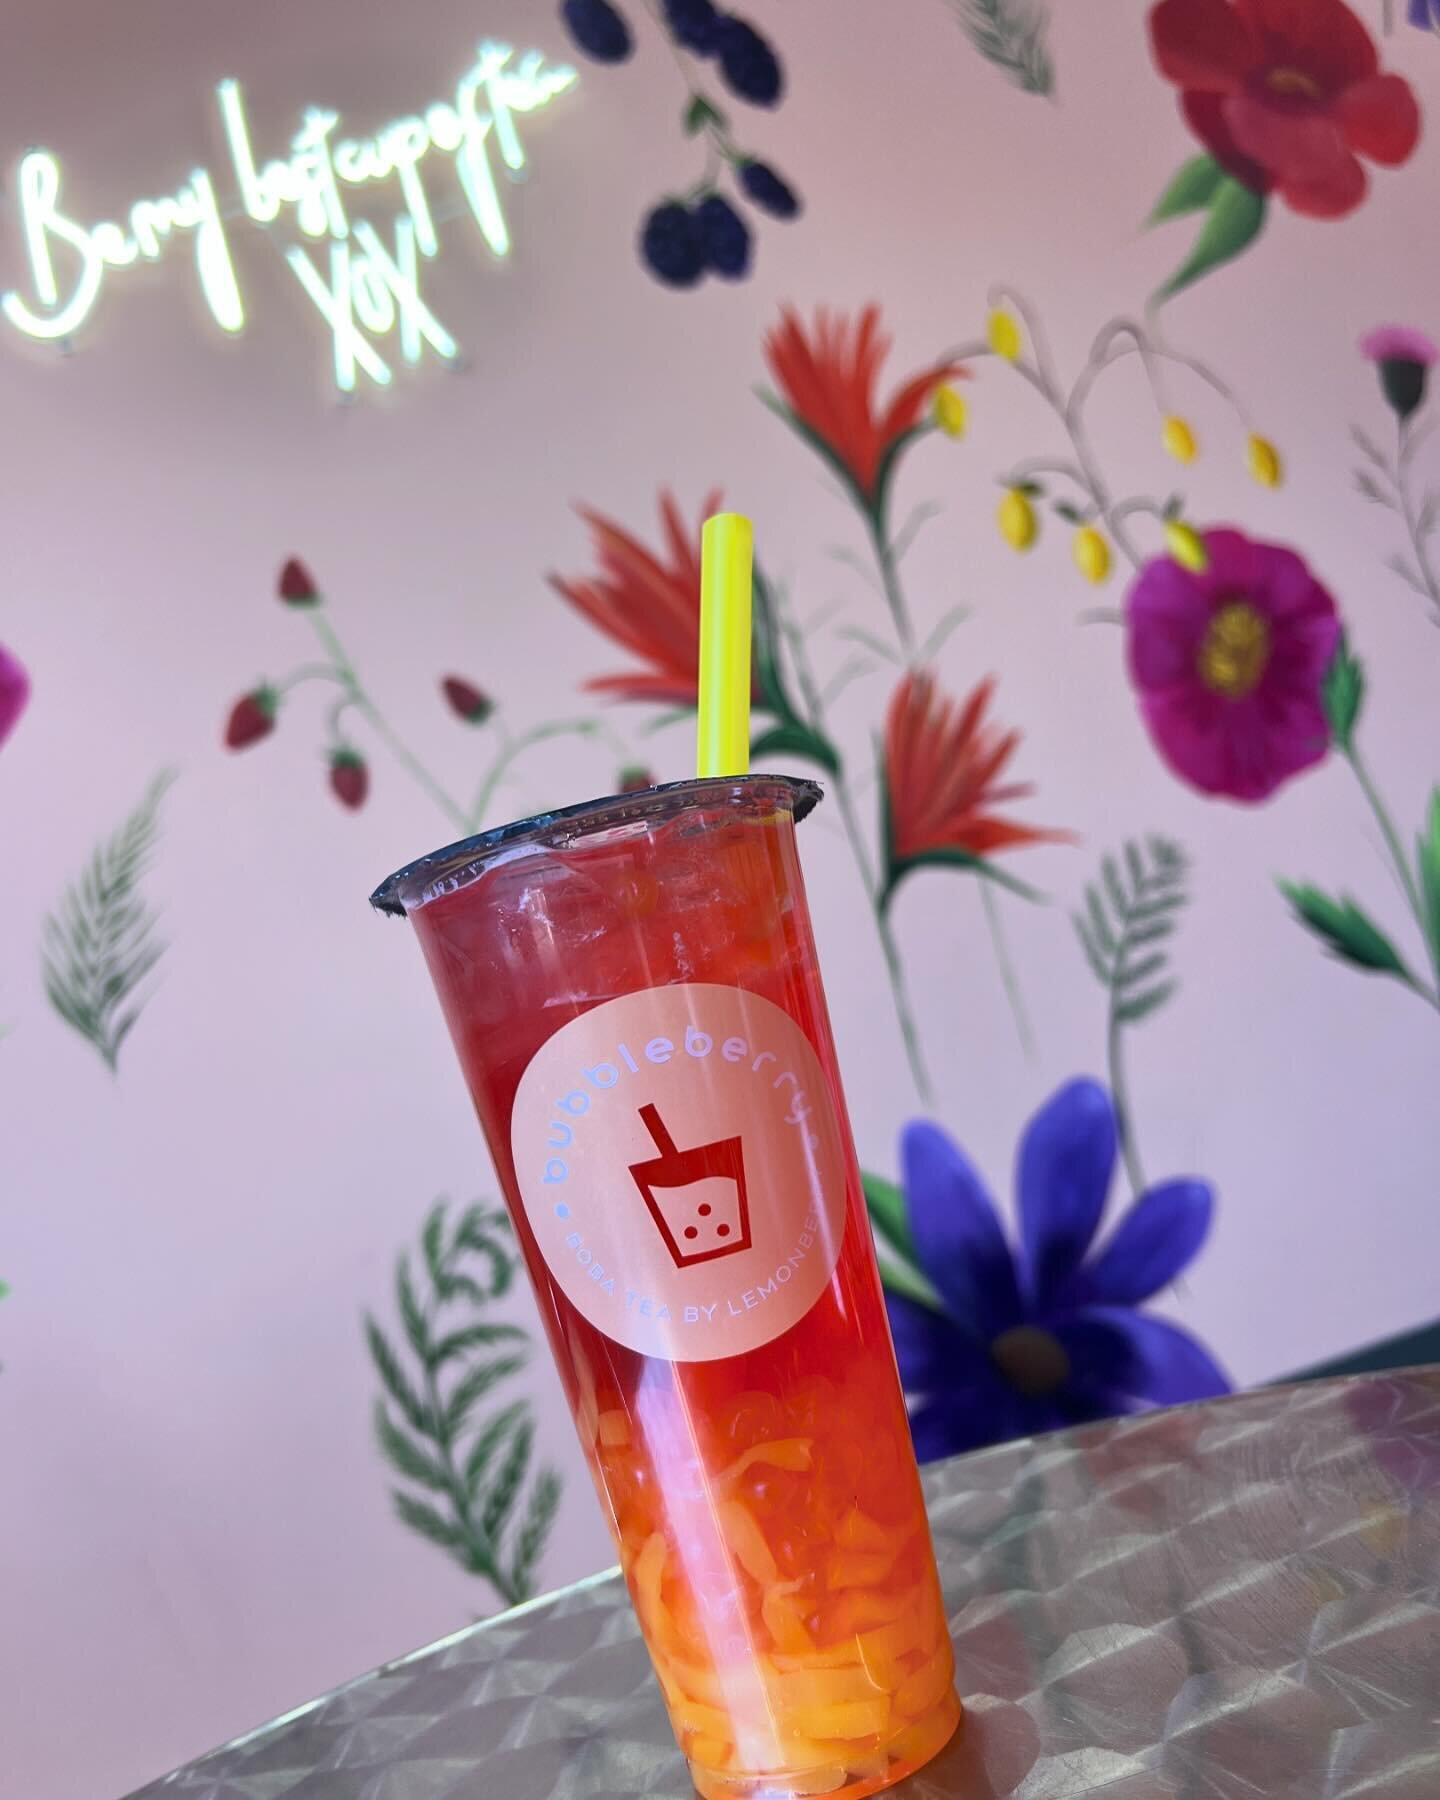 In Brecksville and craving bubble tea🧋 !? Stop at our Brecksville @lemonberryfroyo store! We have bubbleberry inside the store with our full boba tea menu. 🧋💕

#brecksville #brecksvilleohio #bobatea #bubbletea #bubbleberry